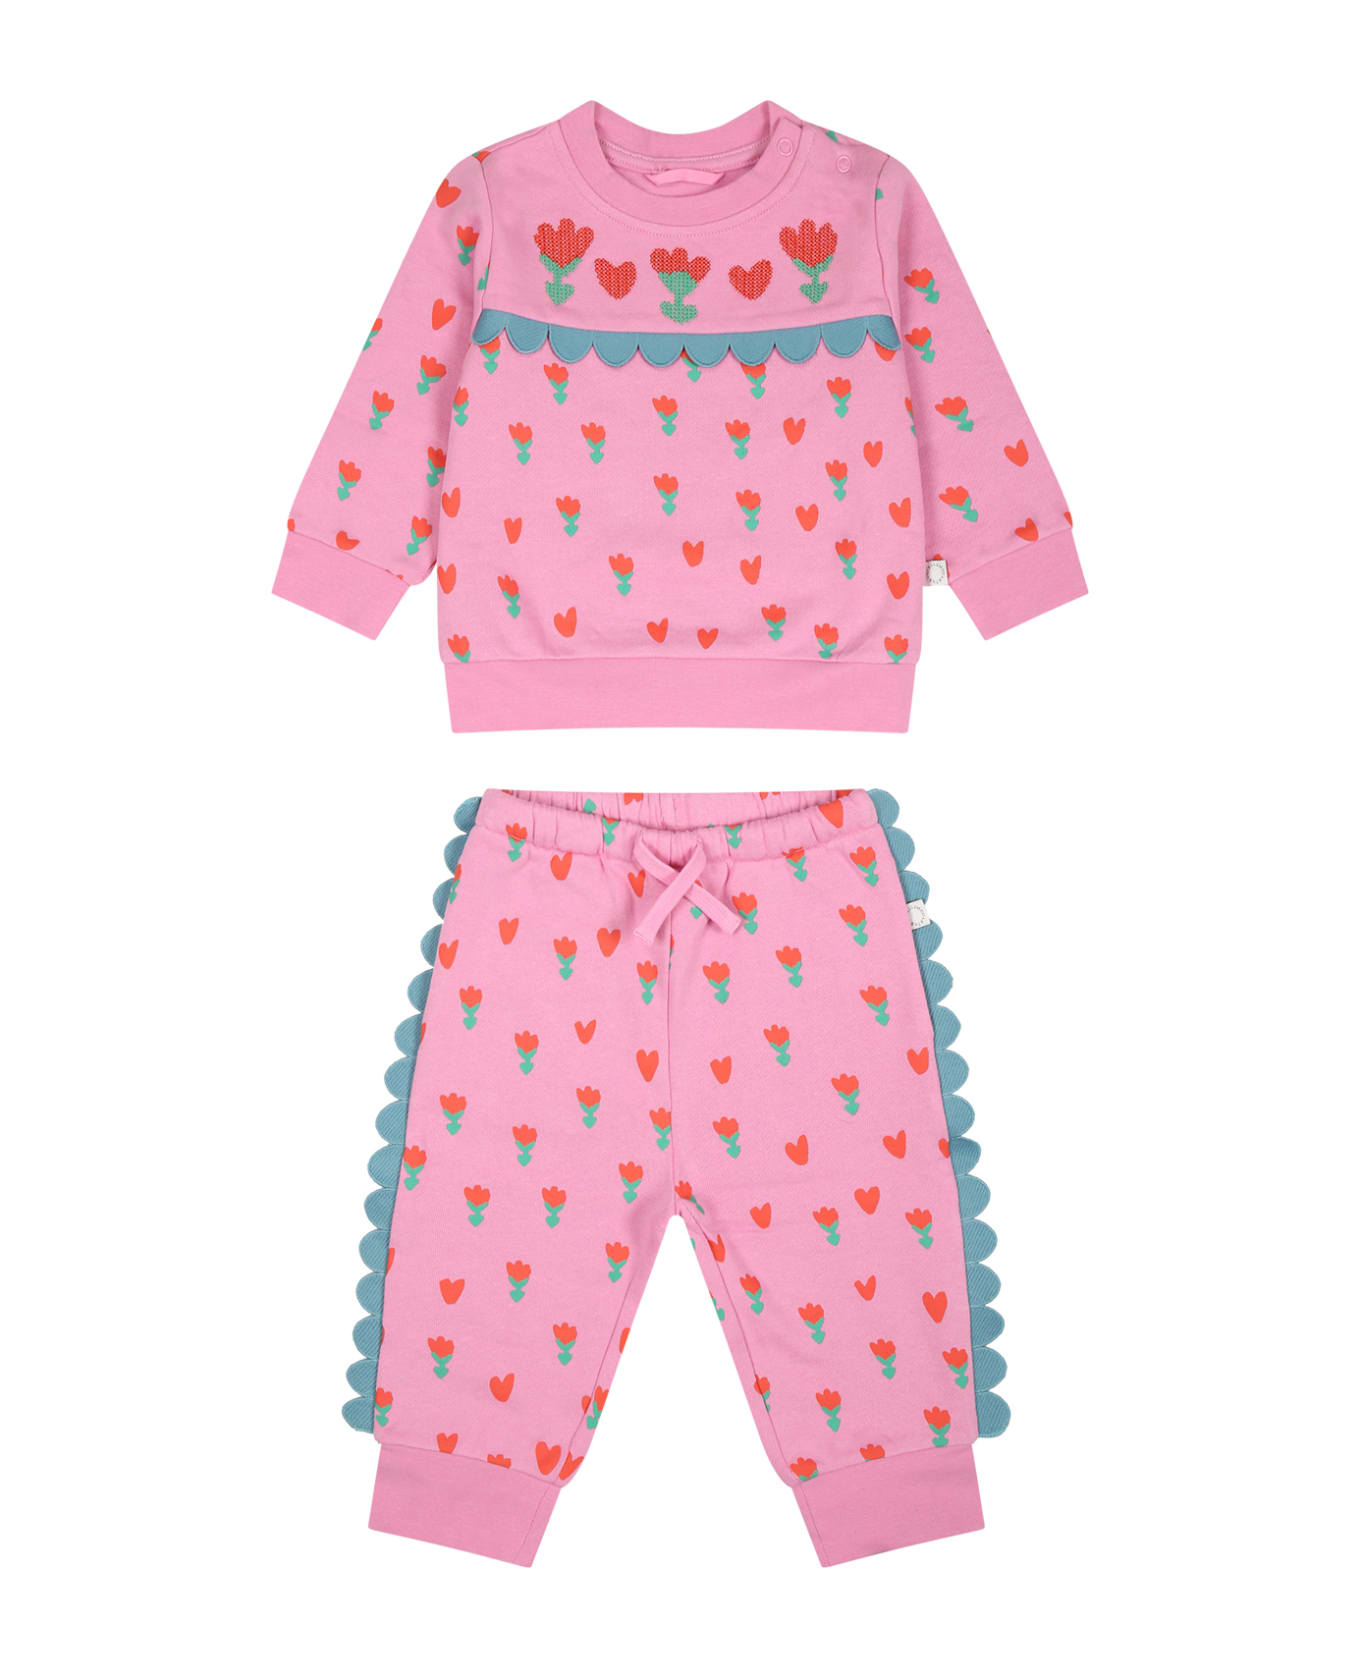 Stella McCartney Kids Pink Tracksuit For Baby Girl With Poppies And Hearts - Pink